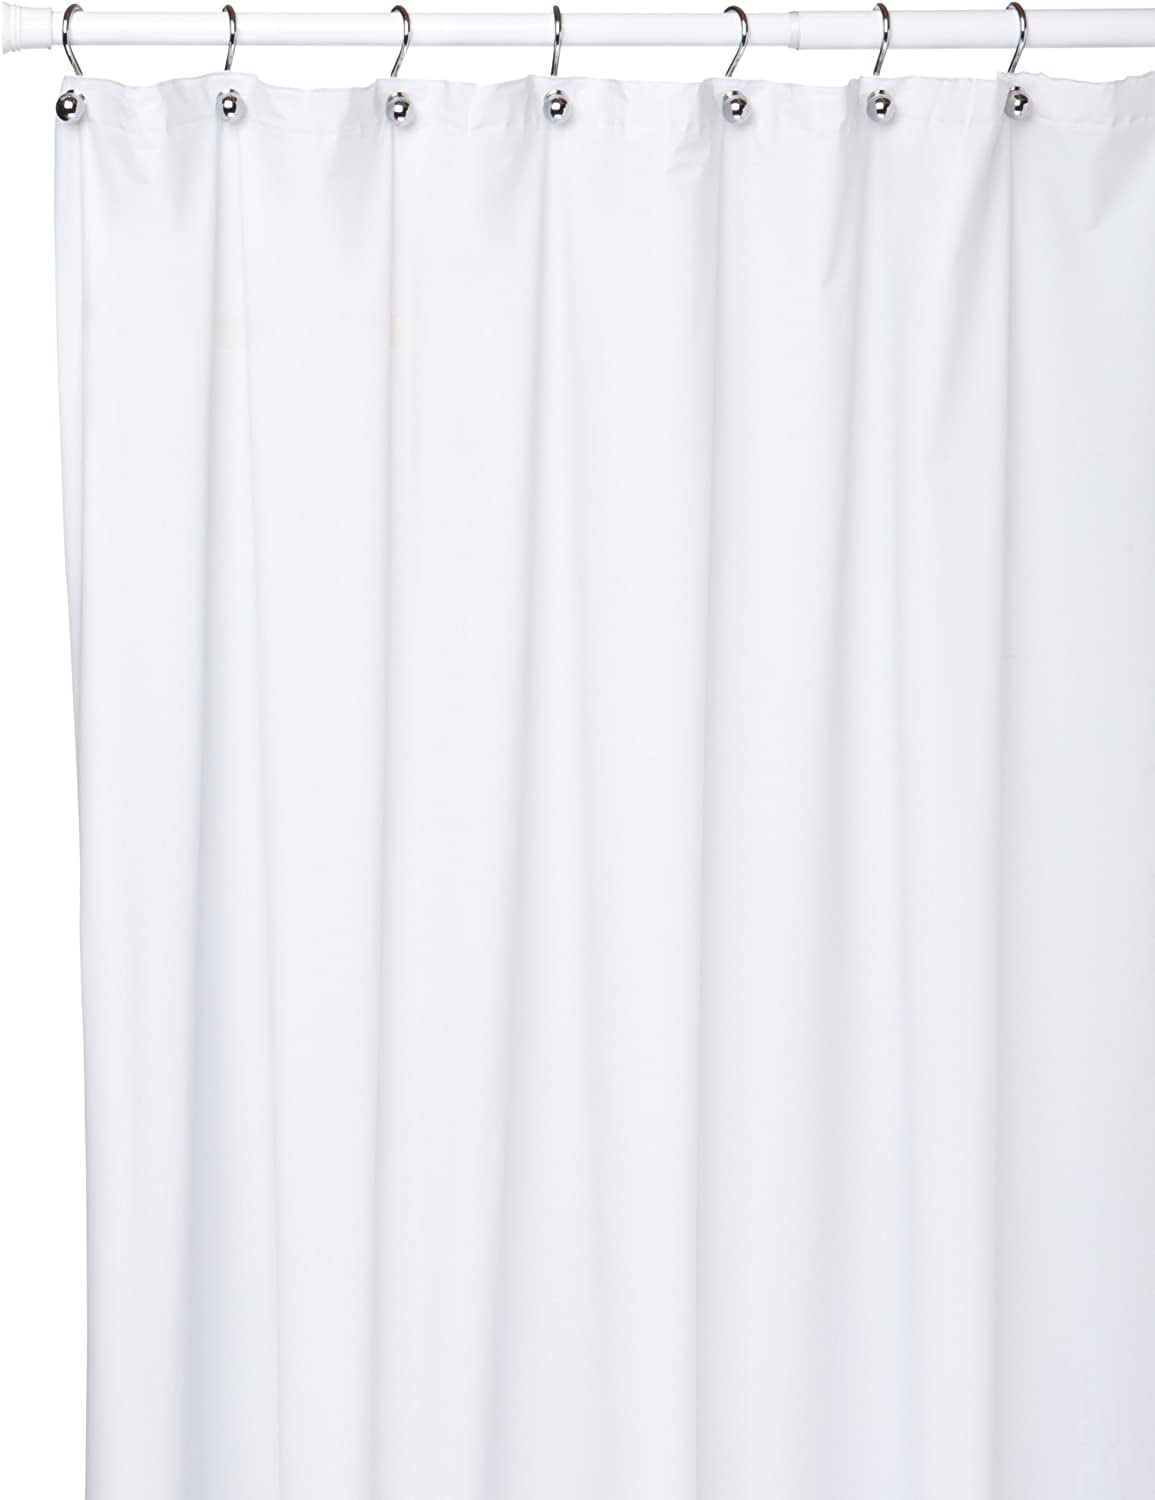 72 Inch X 84 Shower Curtain Liner, Titan Peva Clear Shower Curtain Liner